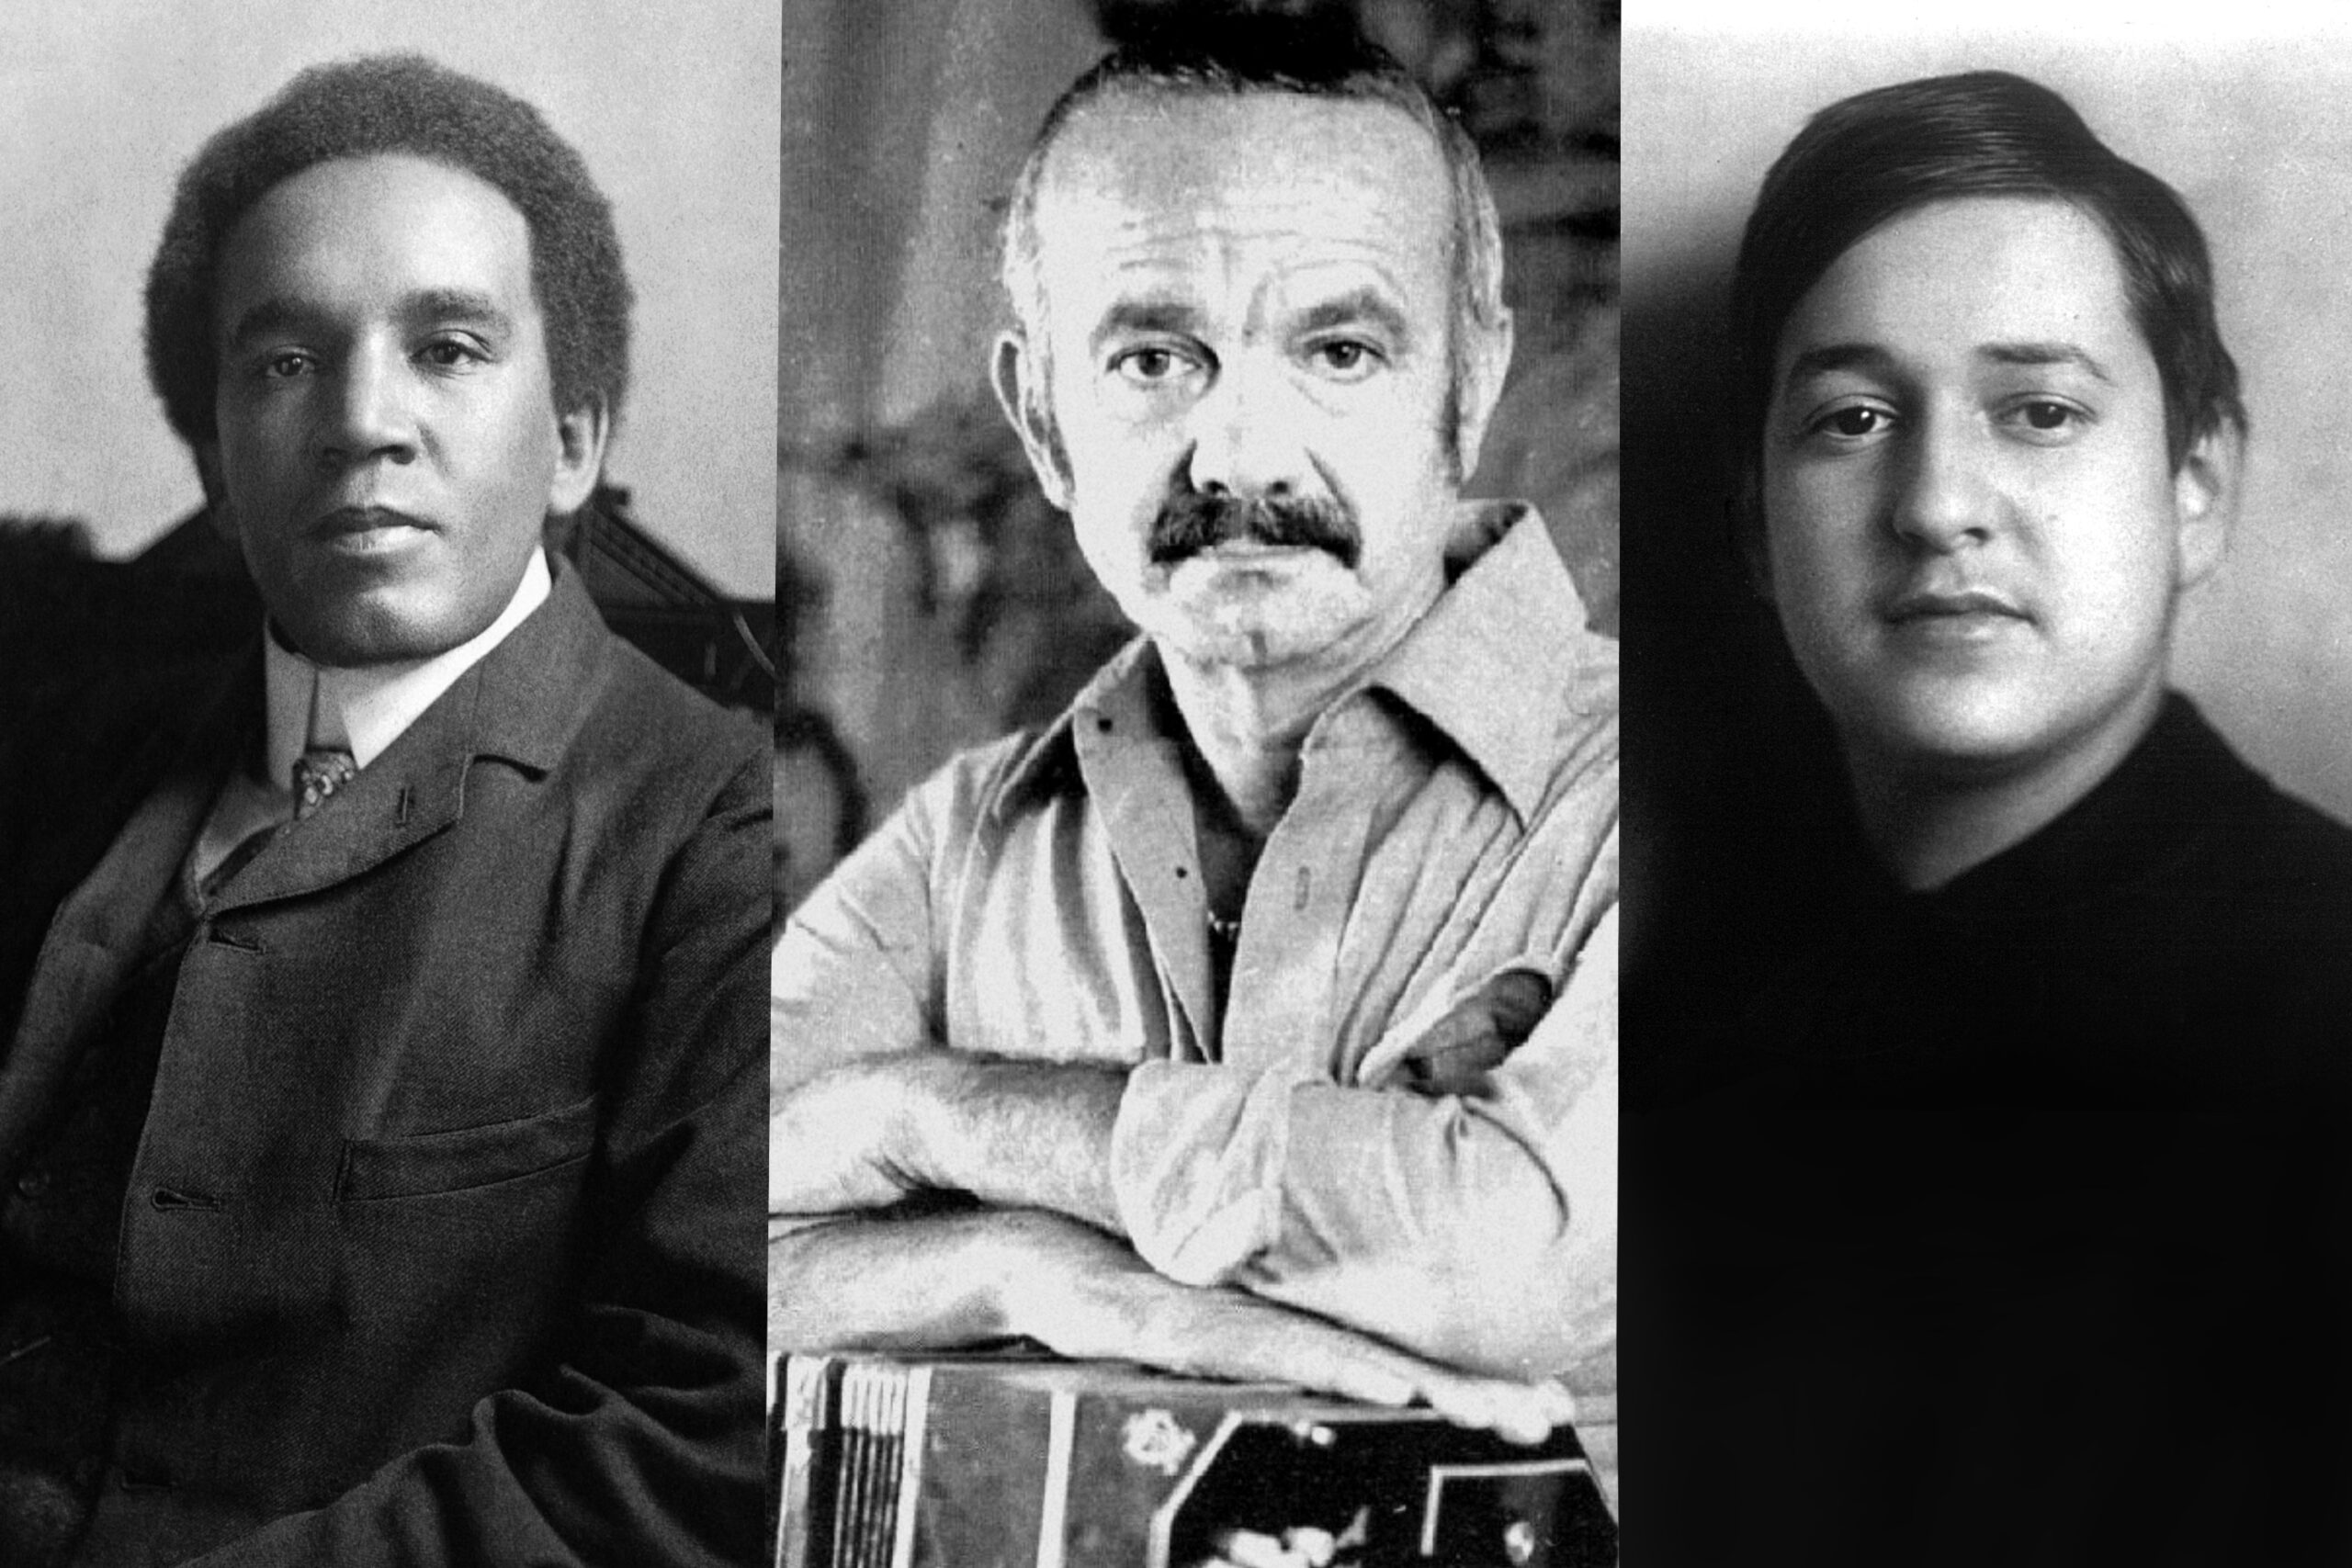 America is a melting pot of immigrants and heritage, and American music is no different. Samuel Coleridge-Taylor, Astor Piazzolla, and Erich Korngold all spent time in the United States.